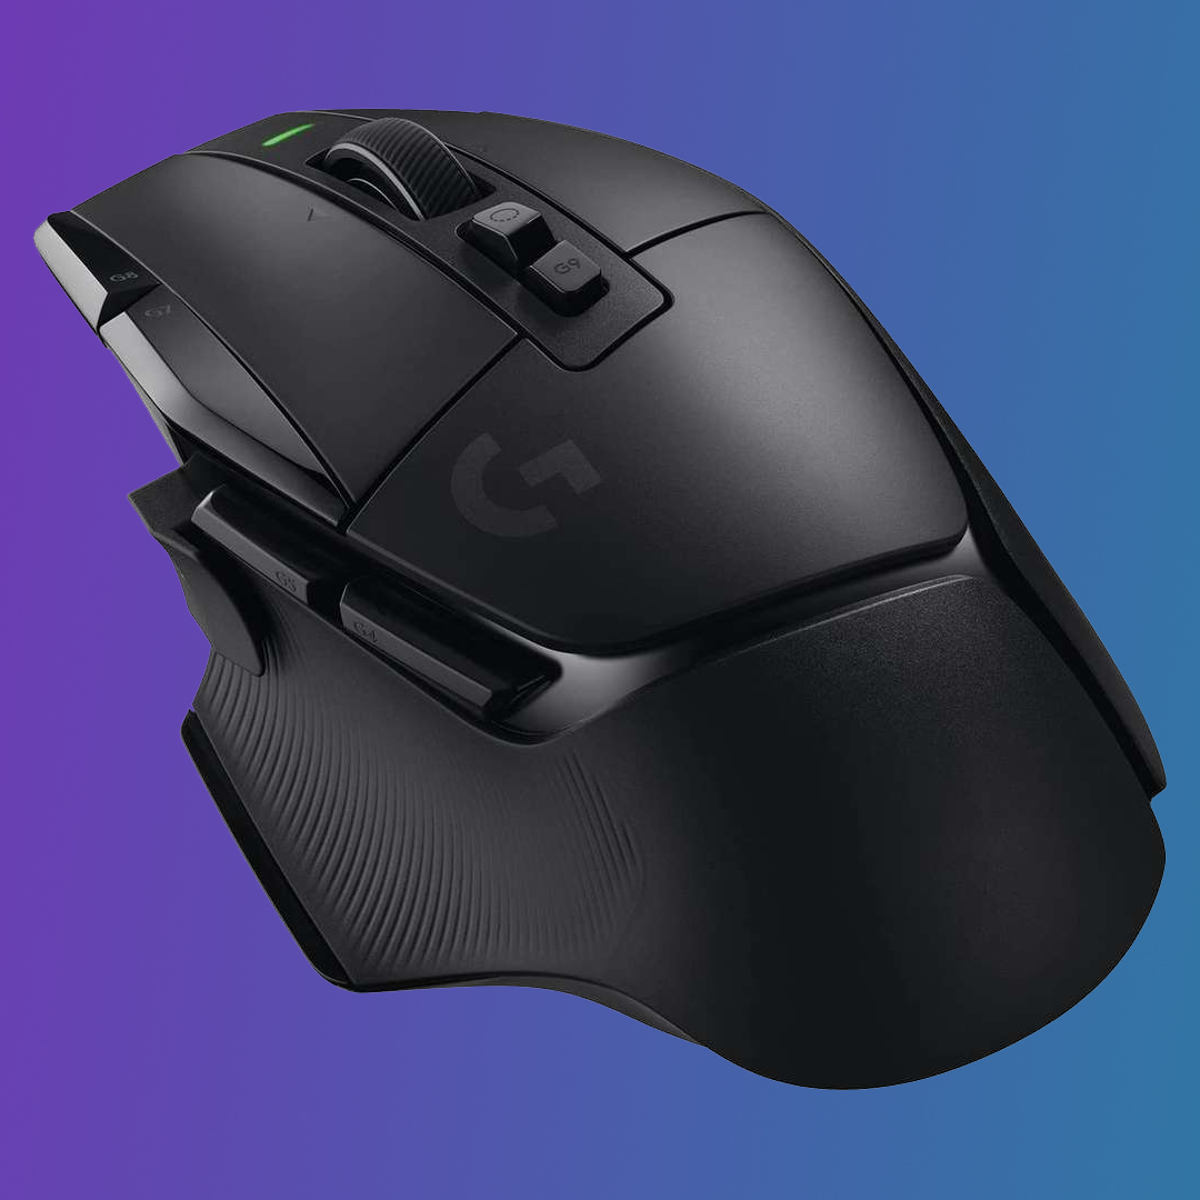 Armoedig Eindig toelage The legendary Logitech G502 X Lightspeed is down to a new low at Amazon |  Eurogamer.net